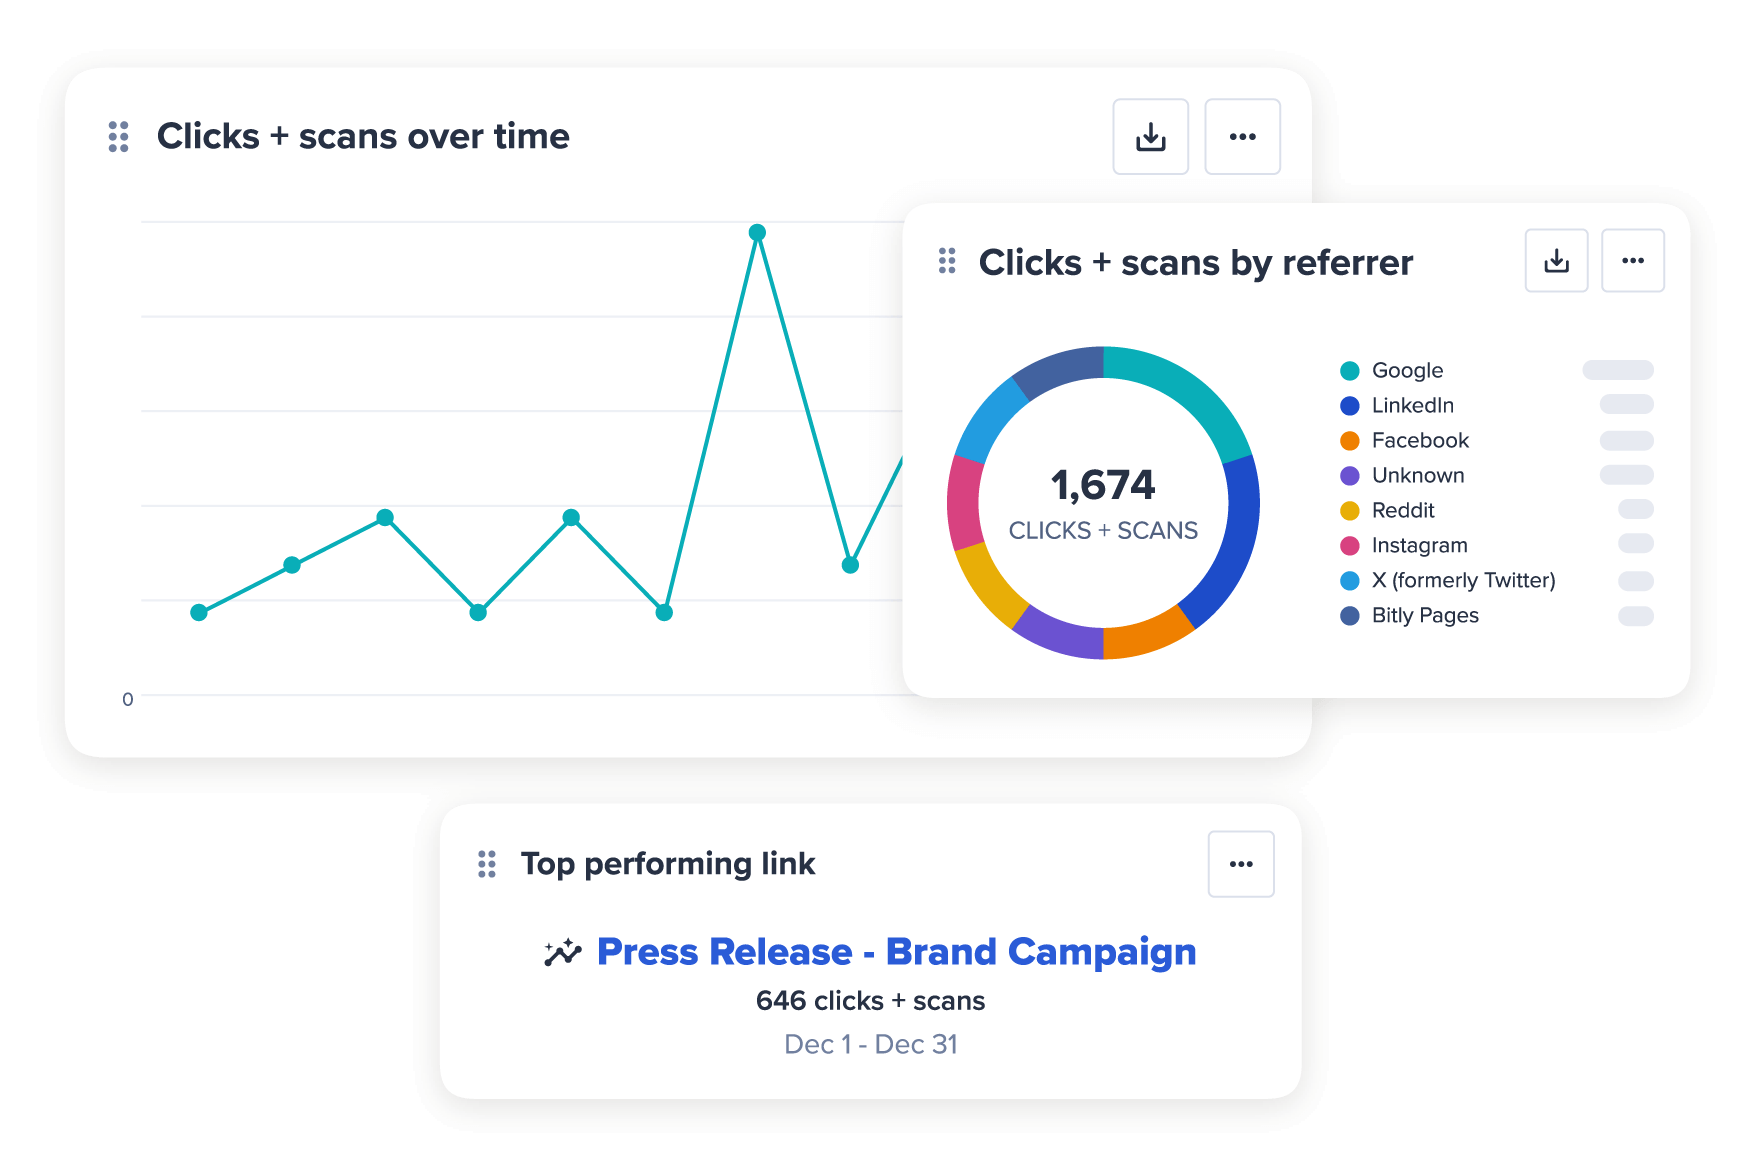  Statistics for clicks + scans over time and by referrer and top performing link info